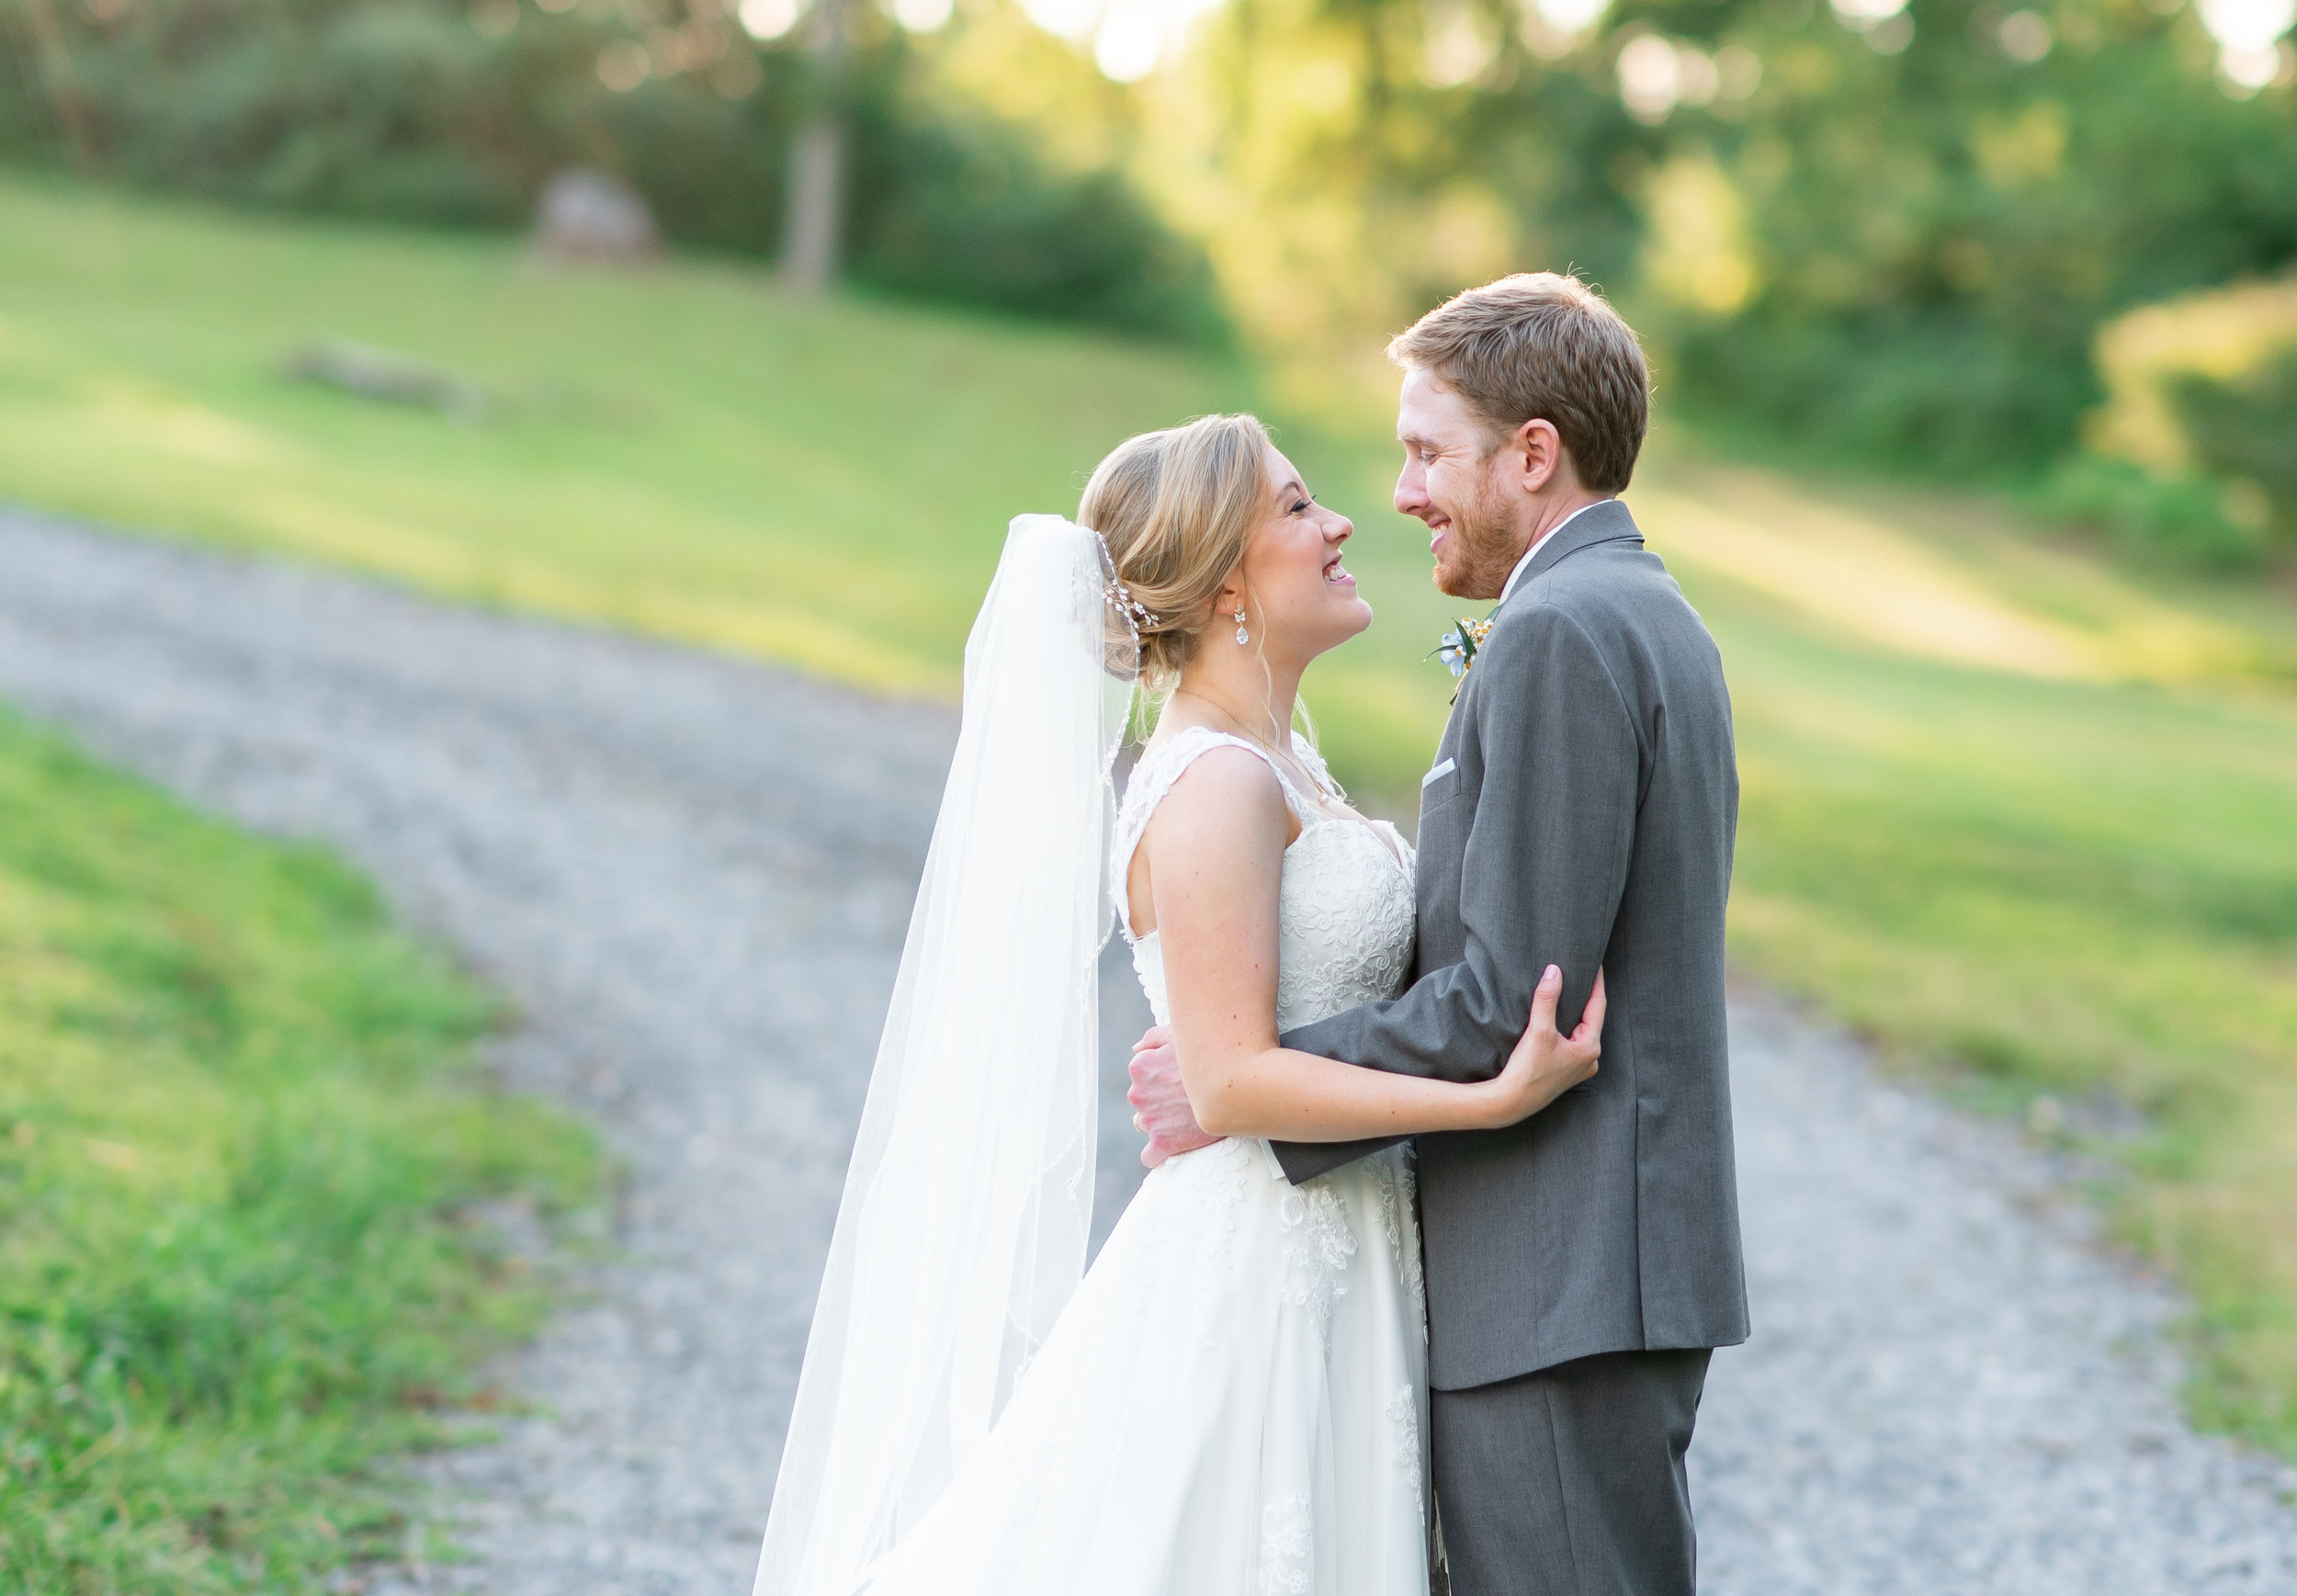 August wedding at stone manor country club in frederick maryland